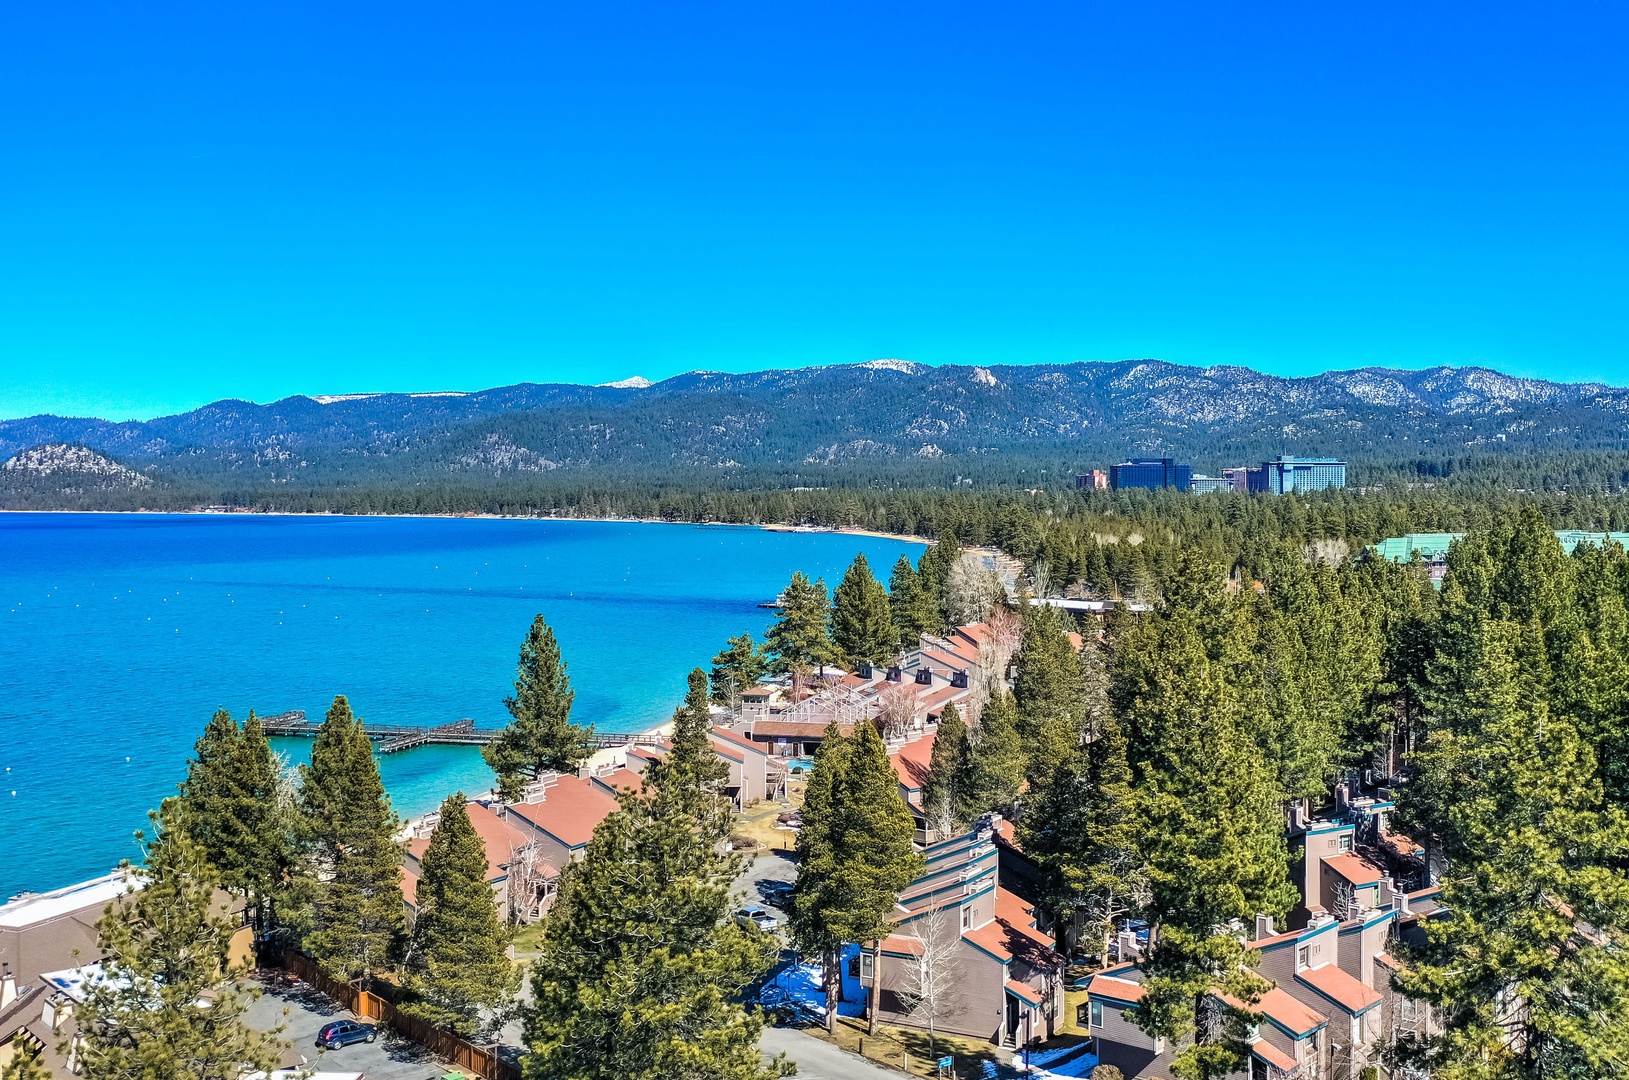 Nearby lake perfect for the summer, 1.2 miles from Heavenly Ski Resort